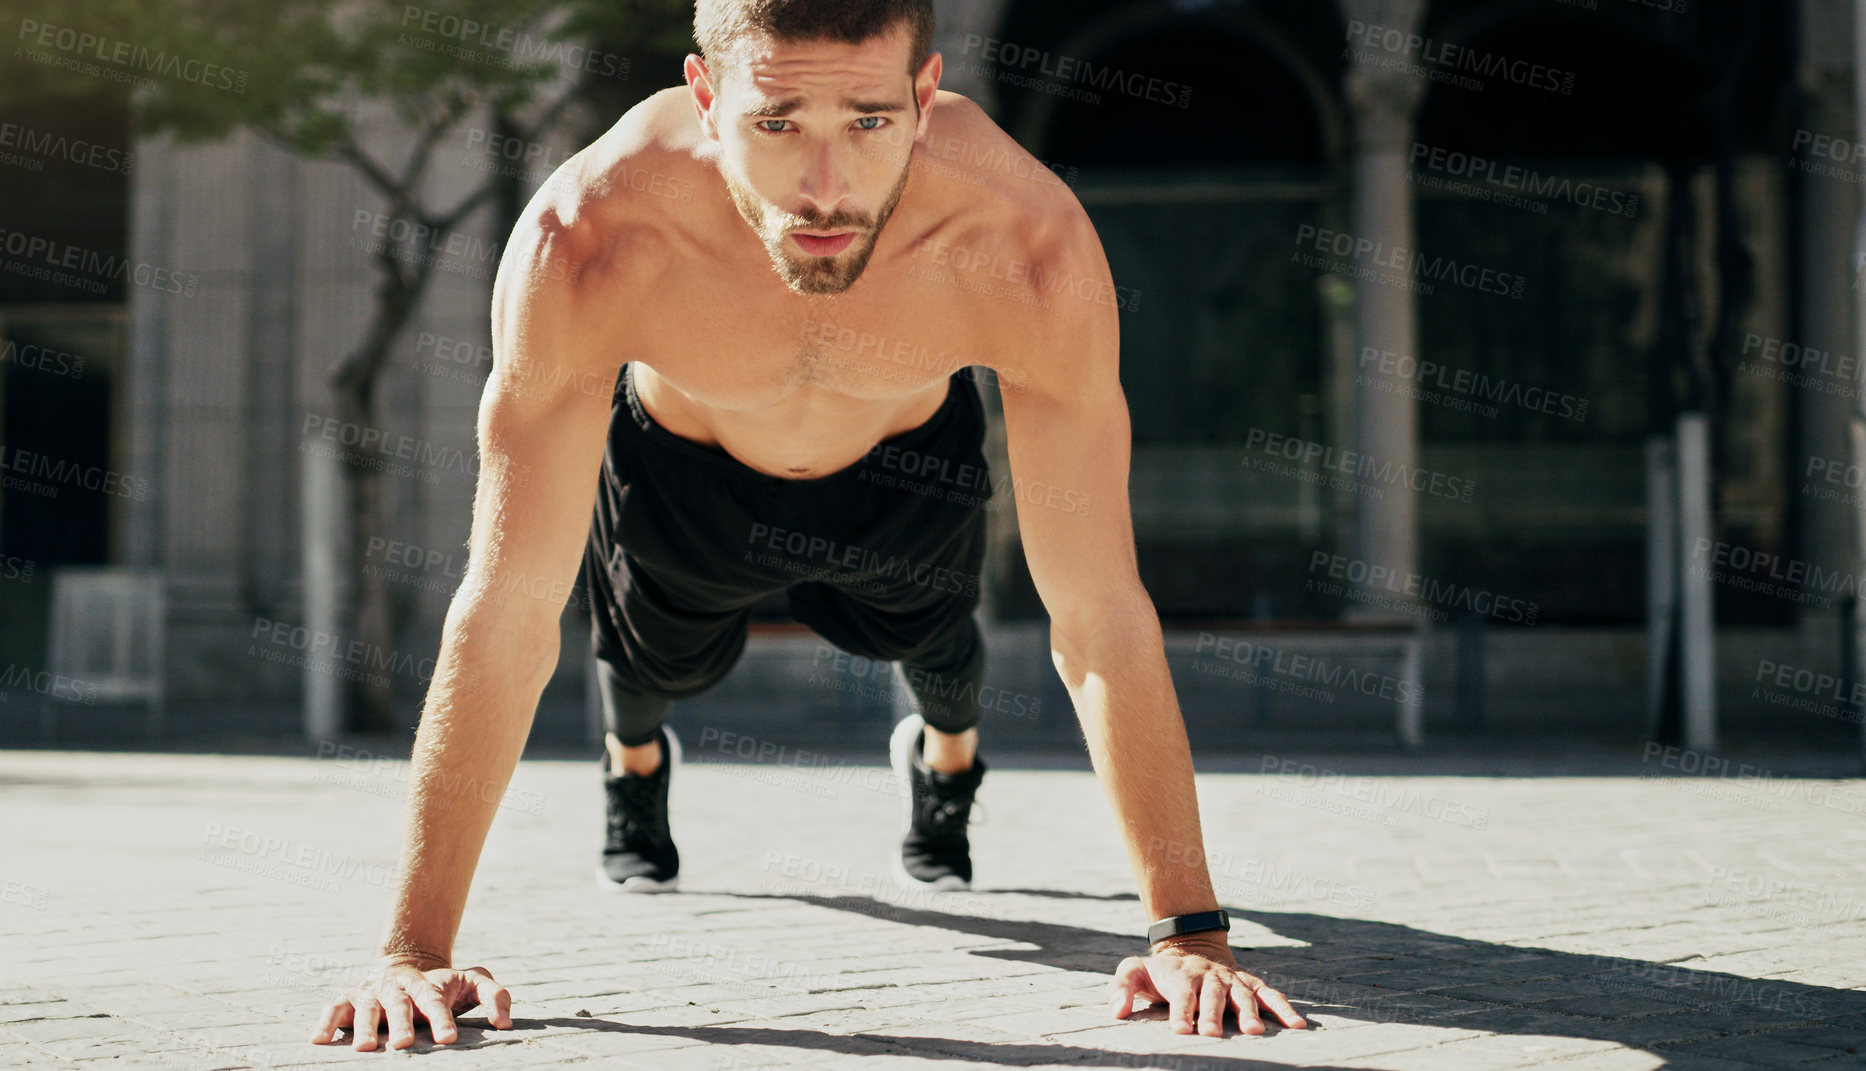 Buy stock photo Shot of a young man doing pushups during his workout in the city